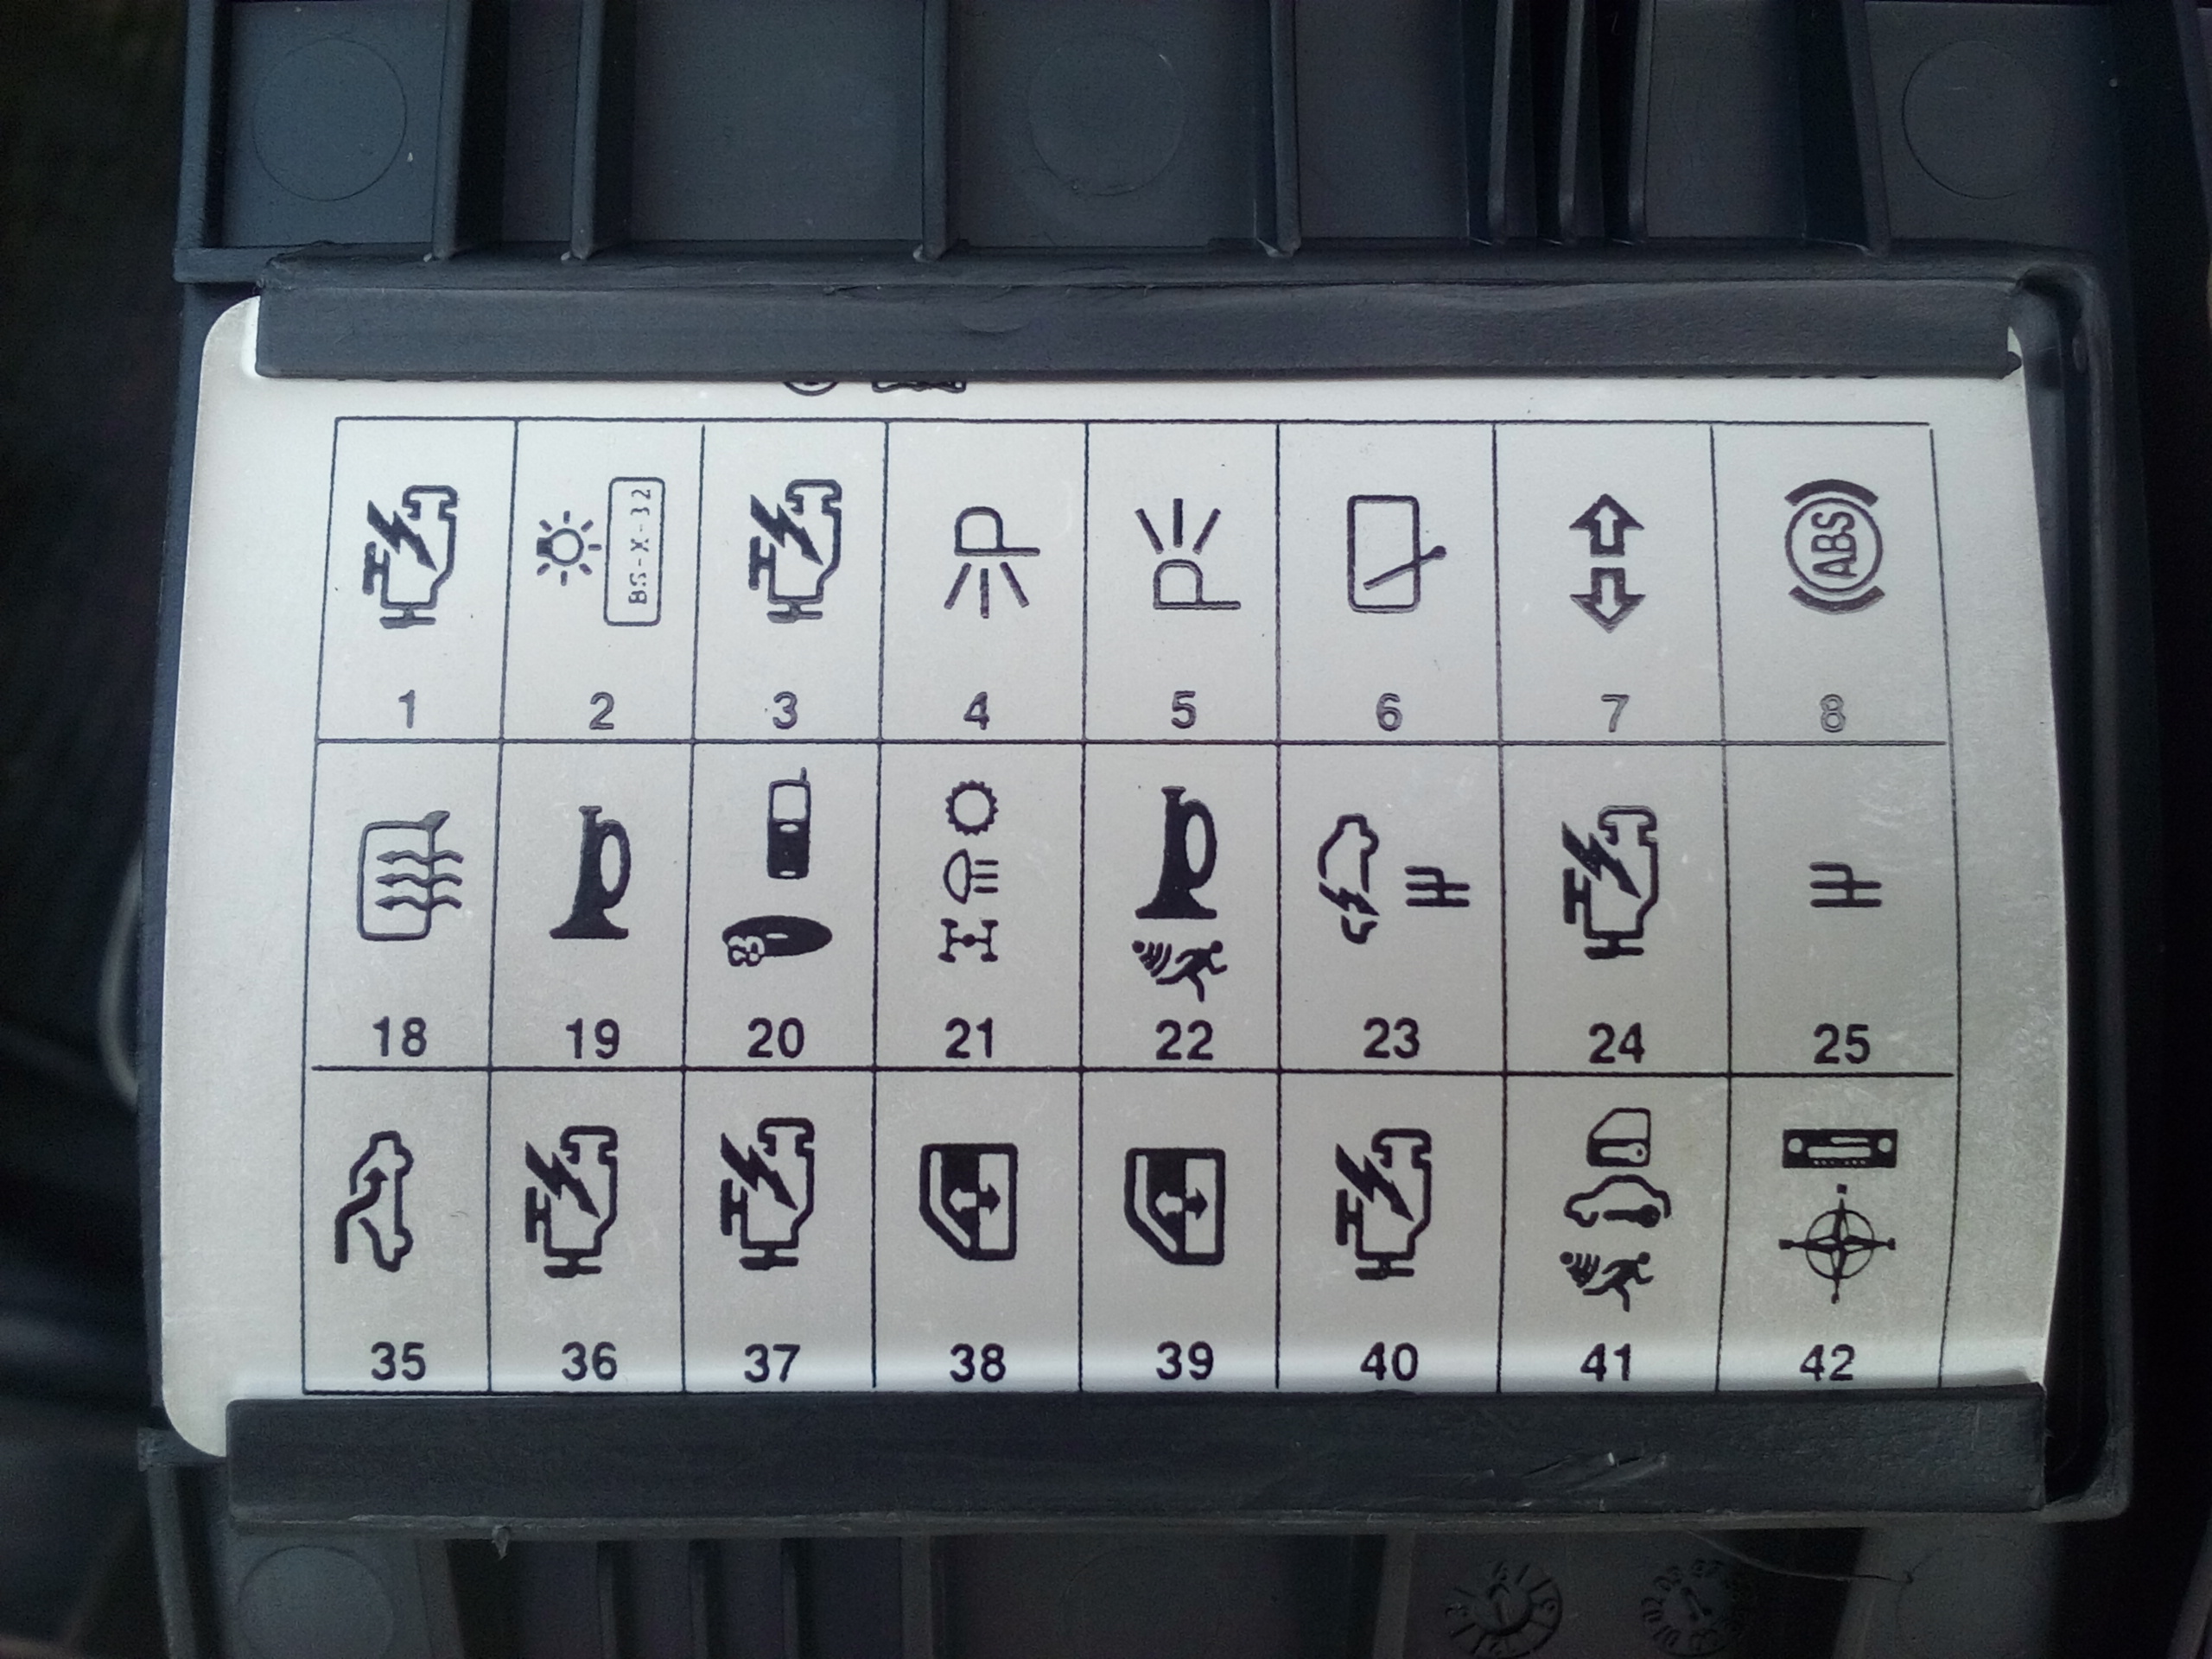 vw polo iii 6n2 i am looking for a description of fuse symbols vw polo iii 6n2 i am looking for a